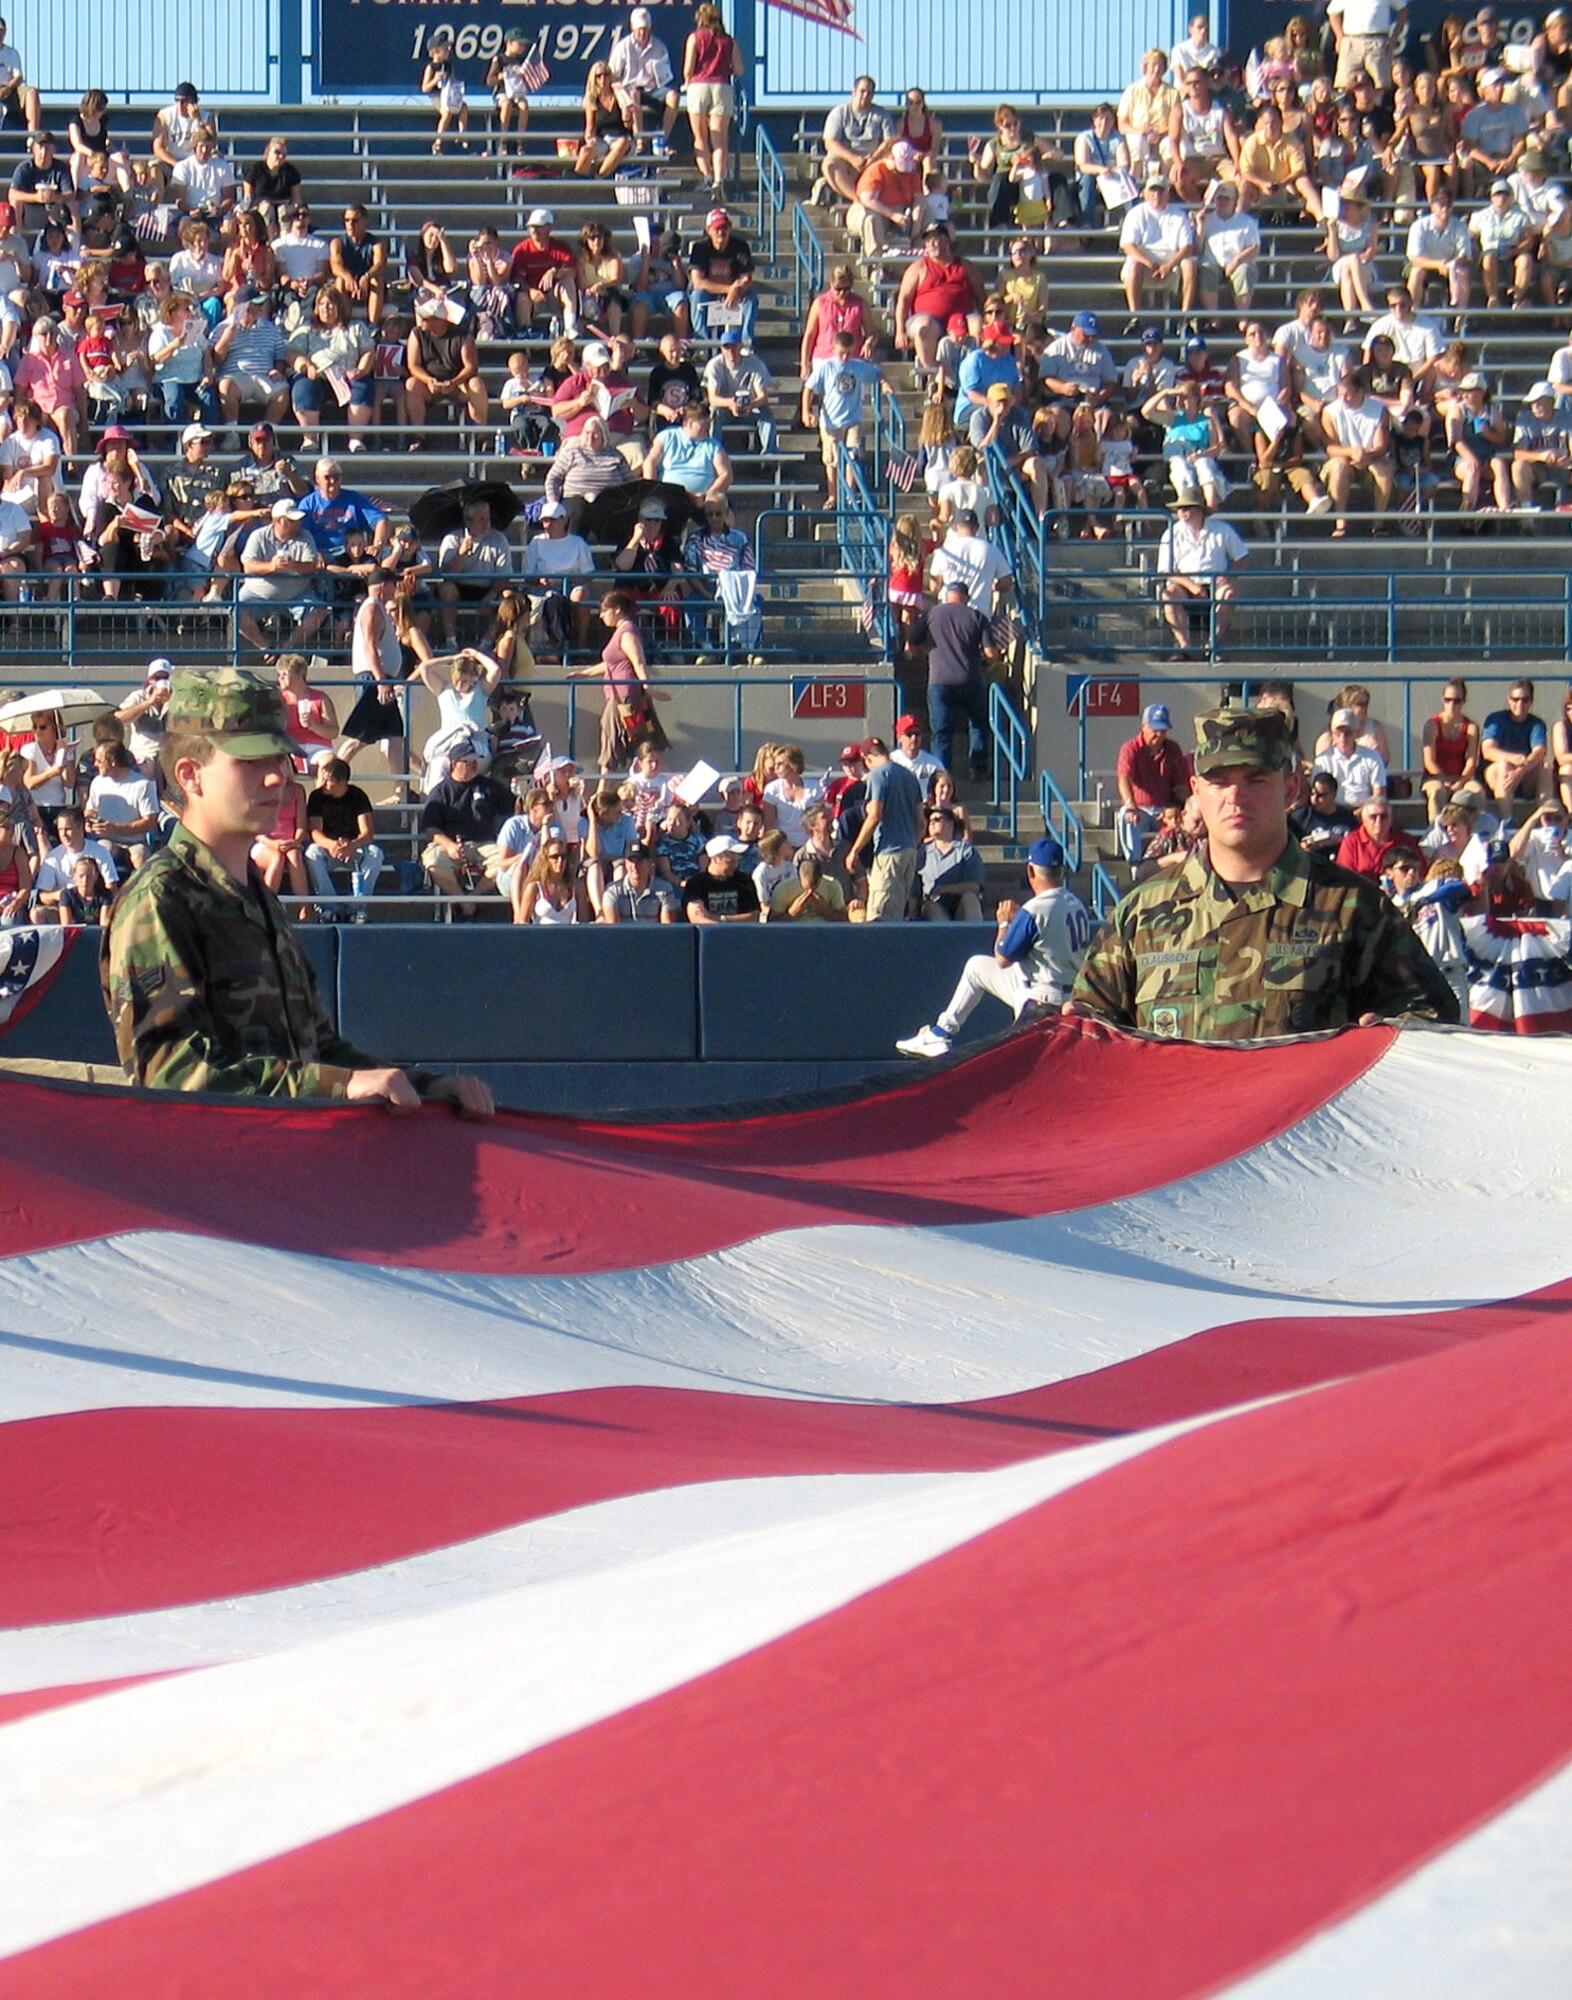 FAIRCHILD AIR FORCE BASE, Wash. – Airman 1st Class Jonathan Luzader (left), 92nd Aircraft Maintenance Squadron aerospace maintenance apprentice, and Master Sgt. Wade Claussen, 92nd Maintenance Operations Squadron training flight chief, hold an American flag on the Avista Stadium baseball field in Spokane during a patriotic pre-game ceremony July 4. Thirty active-duty members from Fairchild participated in the flag unfolding at the Spokane Indians vs. Vancouver Canadians game, and the Fairchild Honor Guard posted the colors during the singing of the National Anthem. More than 7,000 people attended the game. (U.S. Air Force photo/ Staff Sgt. Connie L. Bias) 